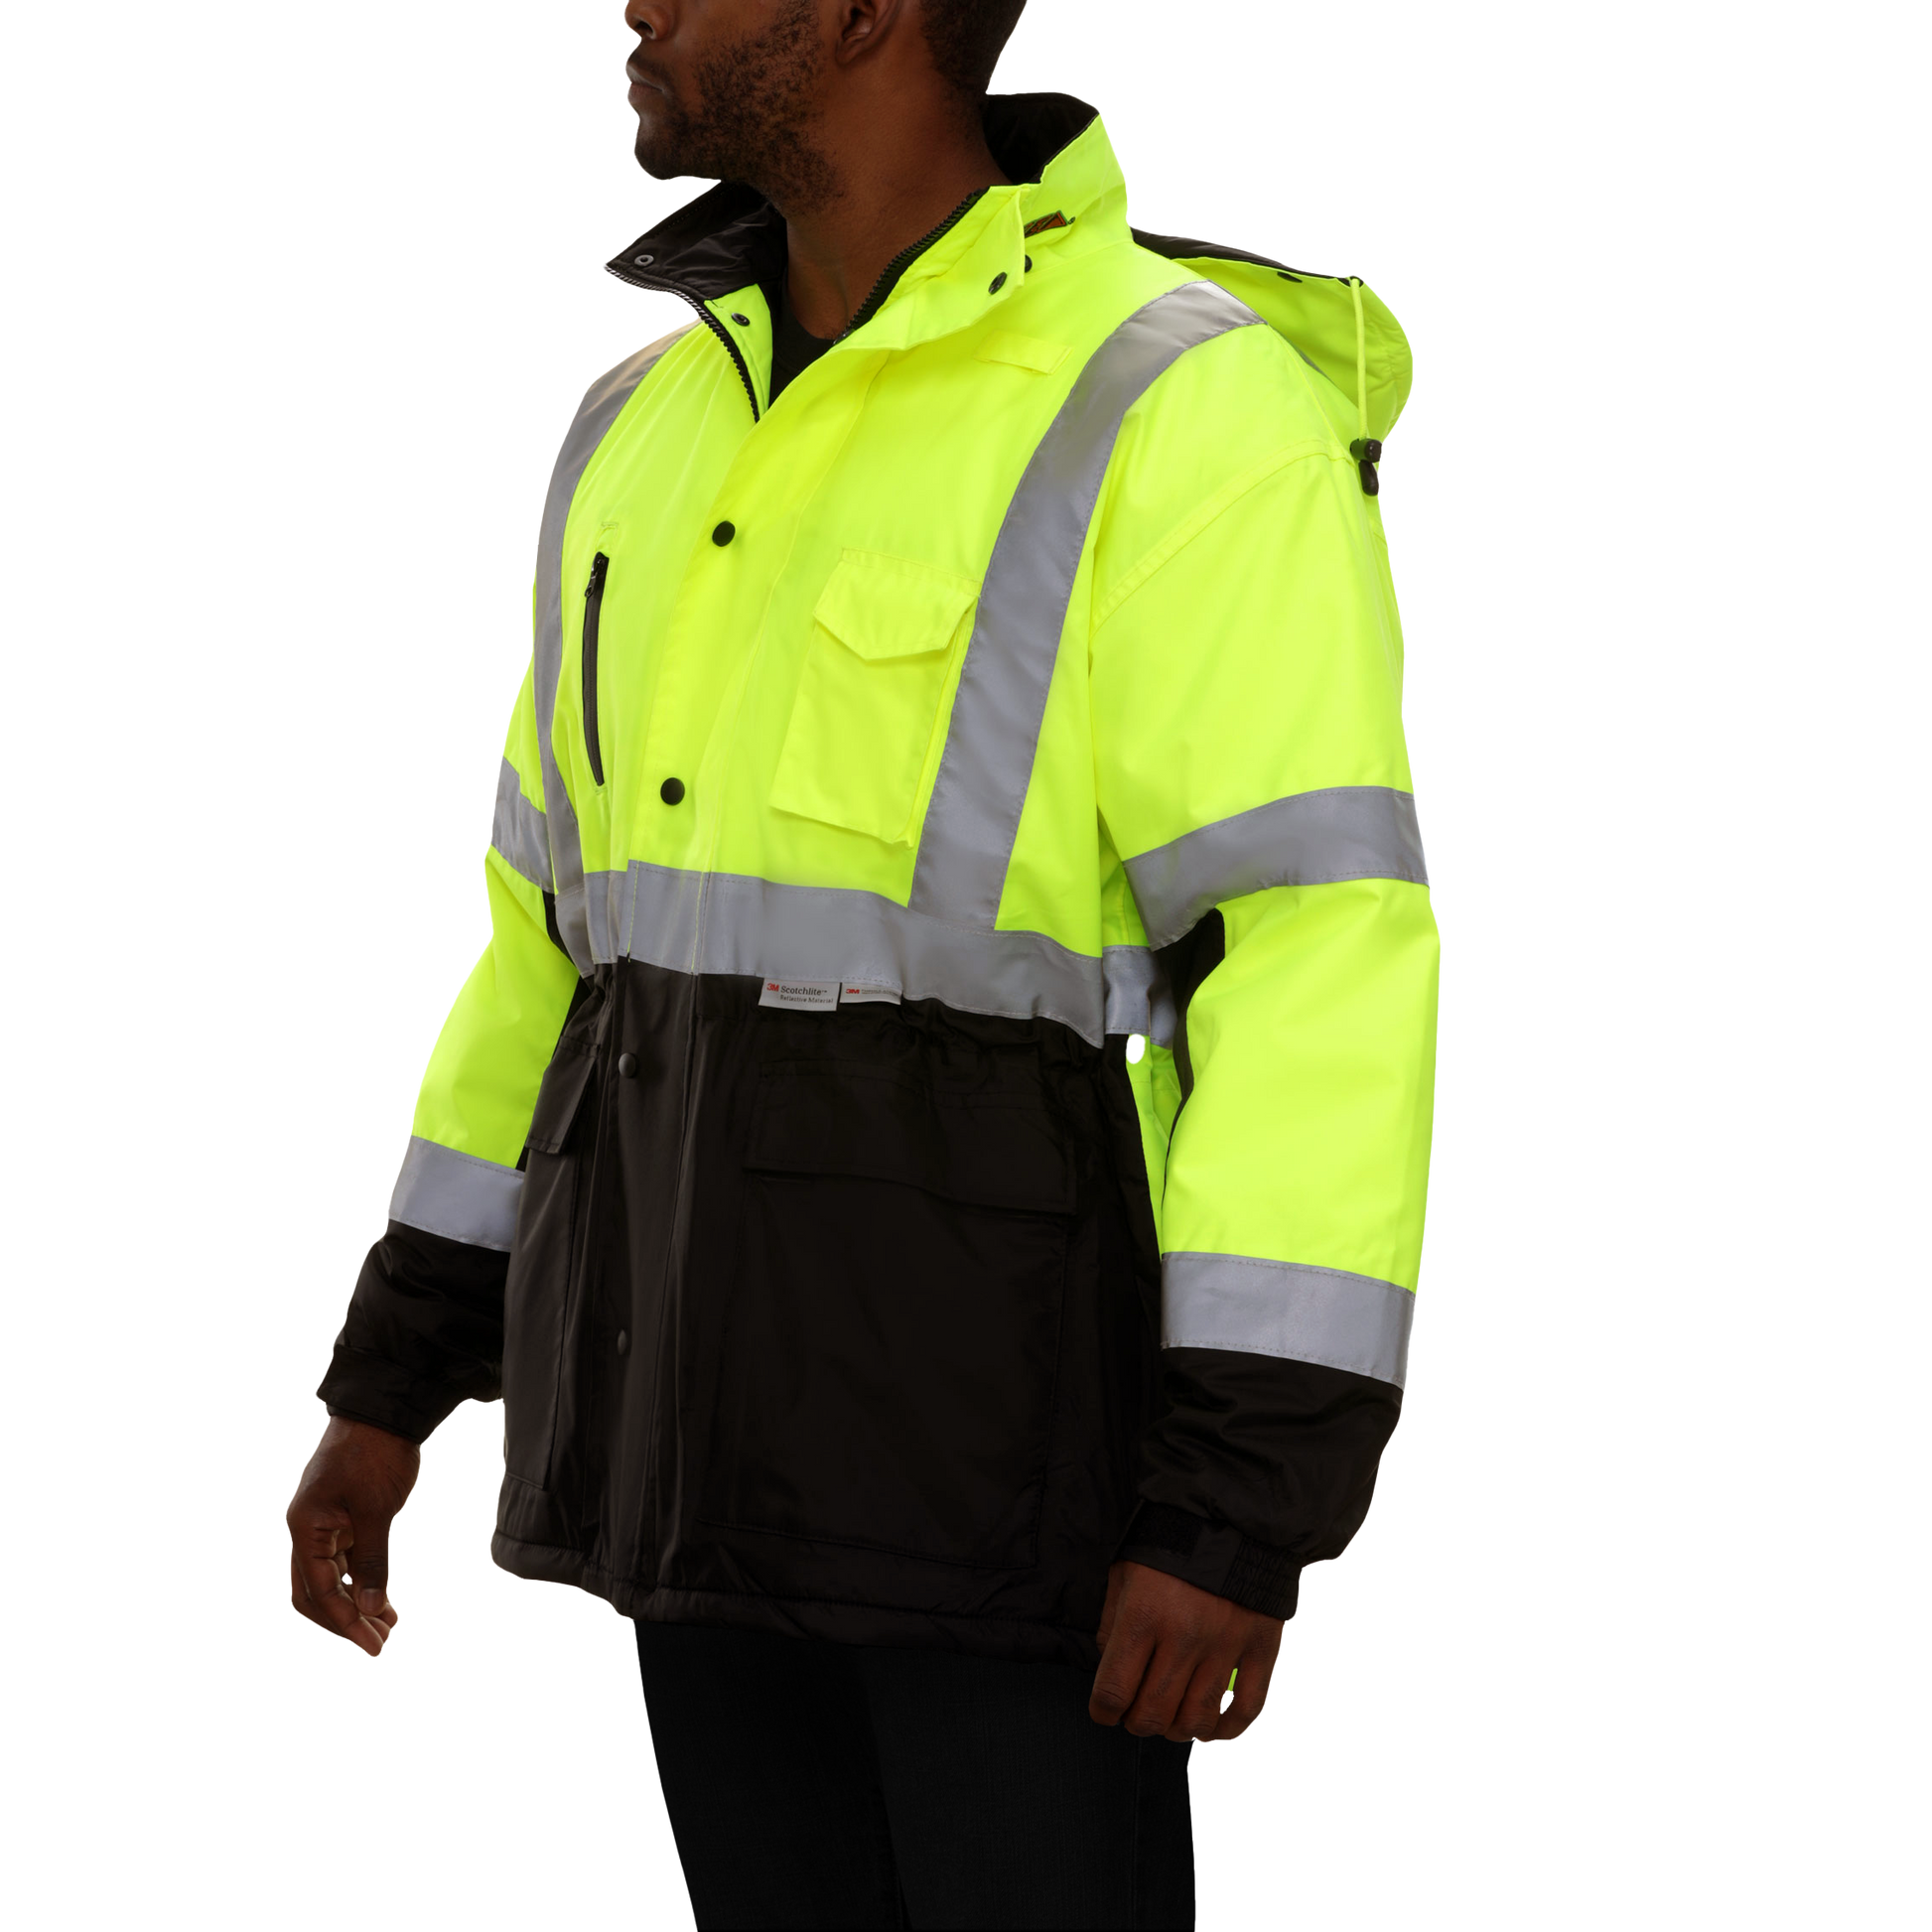 433STLB Safety Jacket: ThinsulateTM Parka: Breathable Waterproof Hooded: 2-Tone Lime